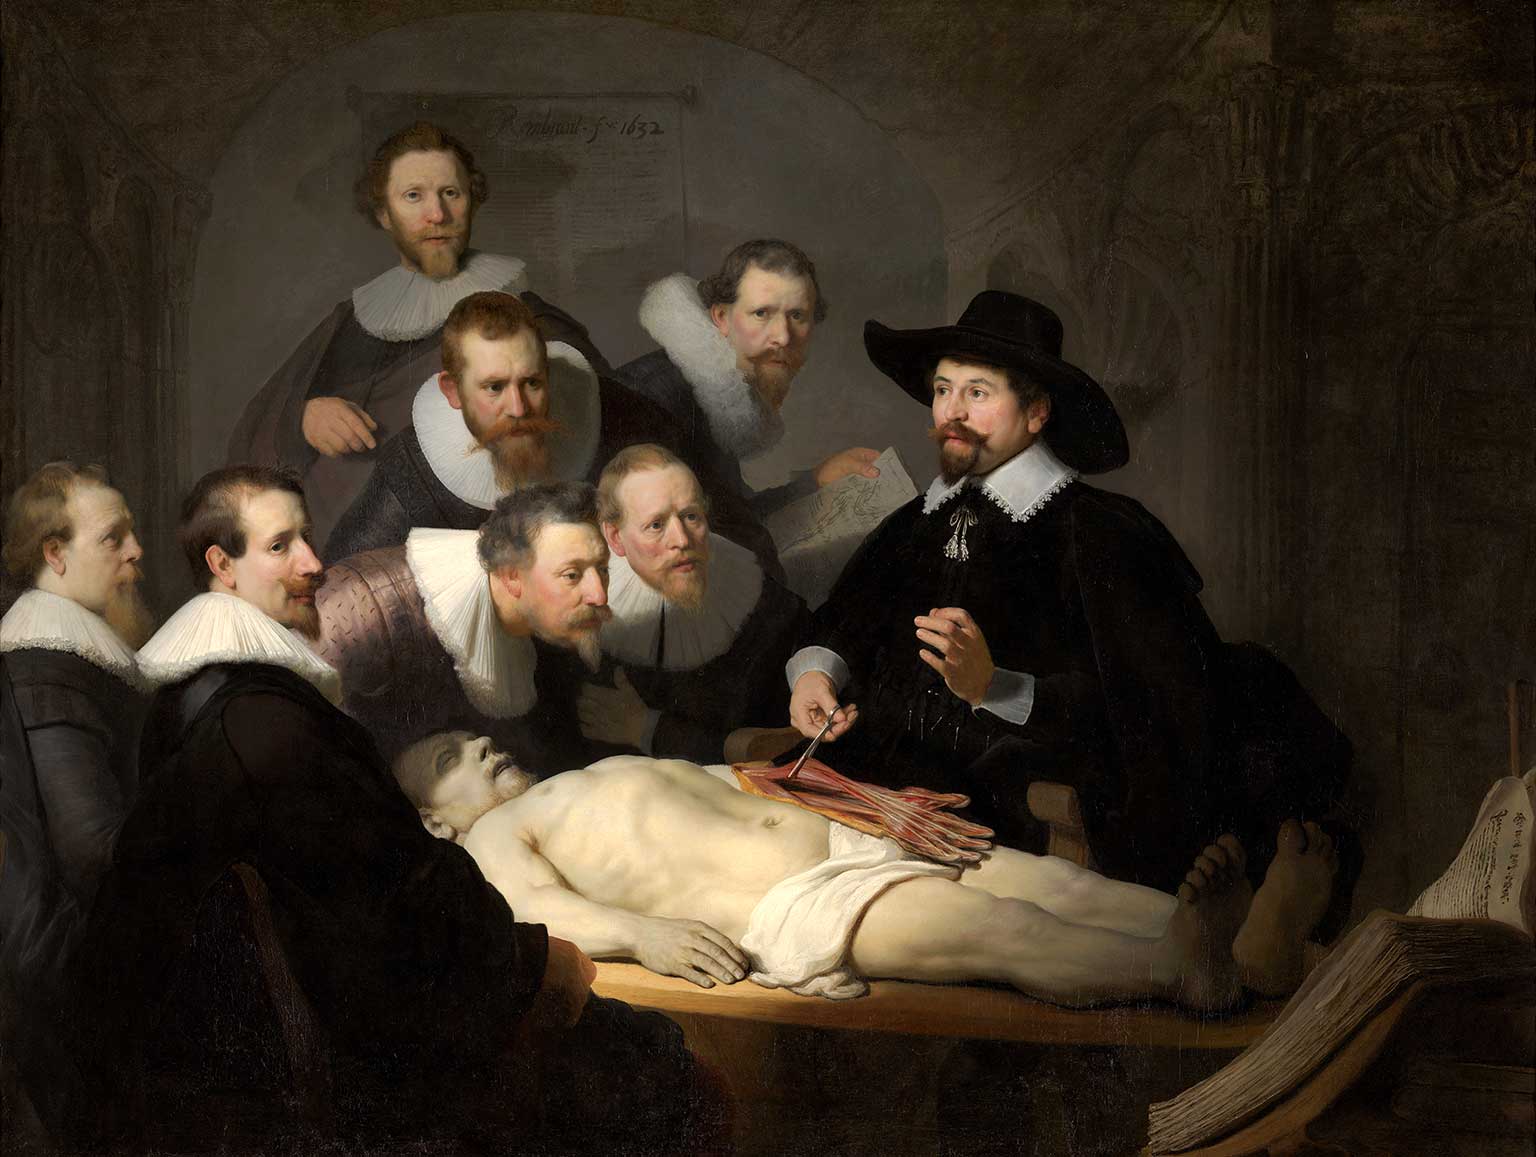 The Anatomy Lesson of Dr. Nicolaes Tulp from 1632 by Rembrandt